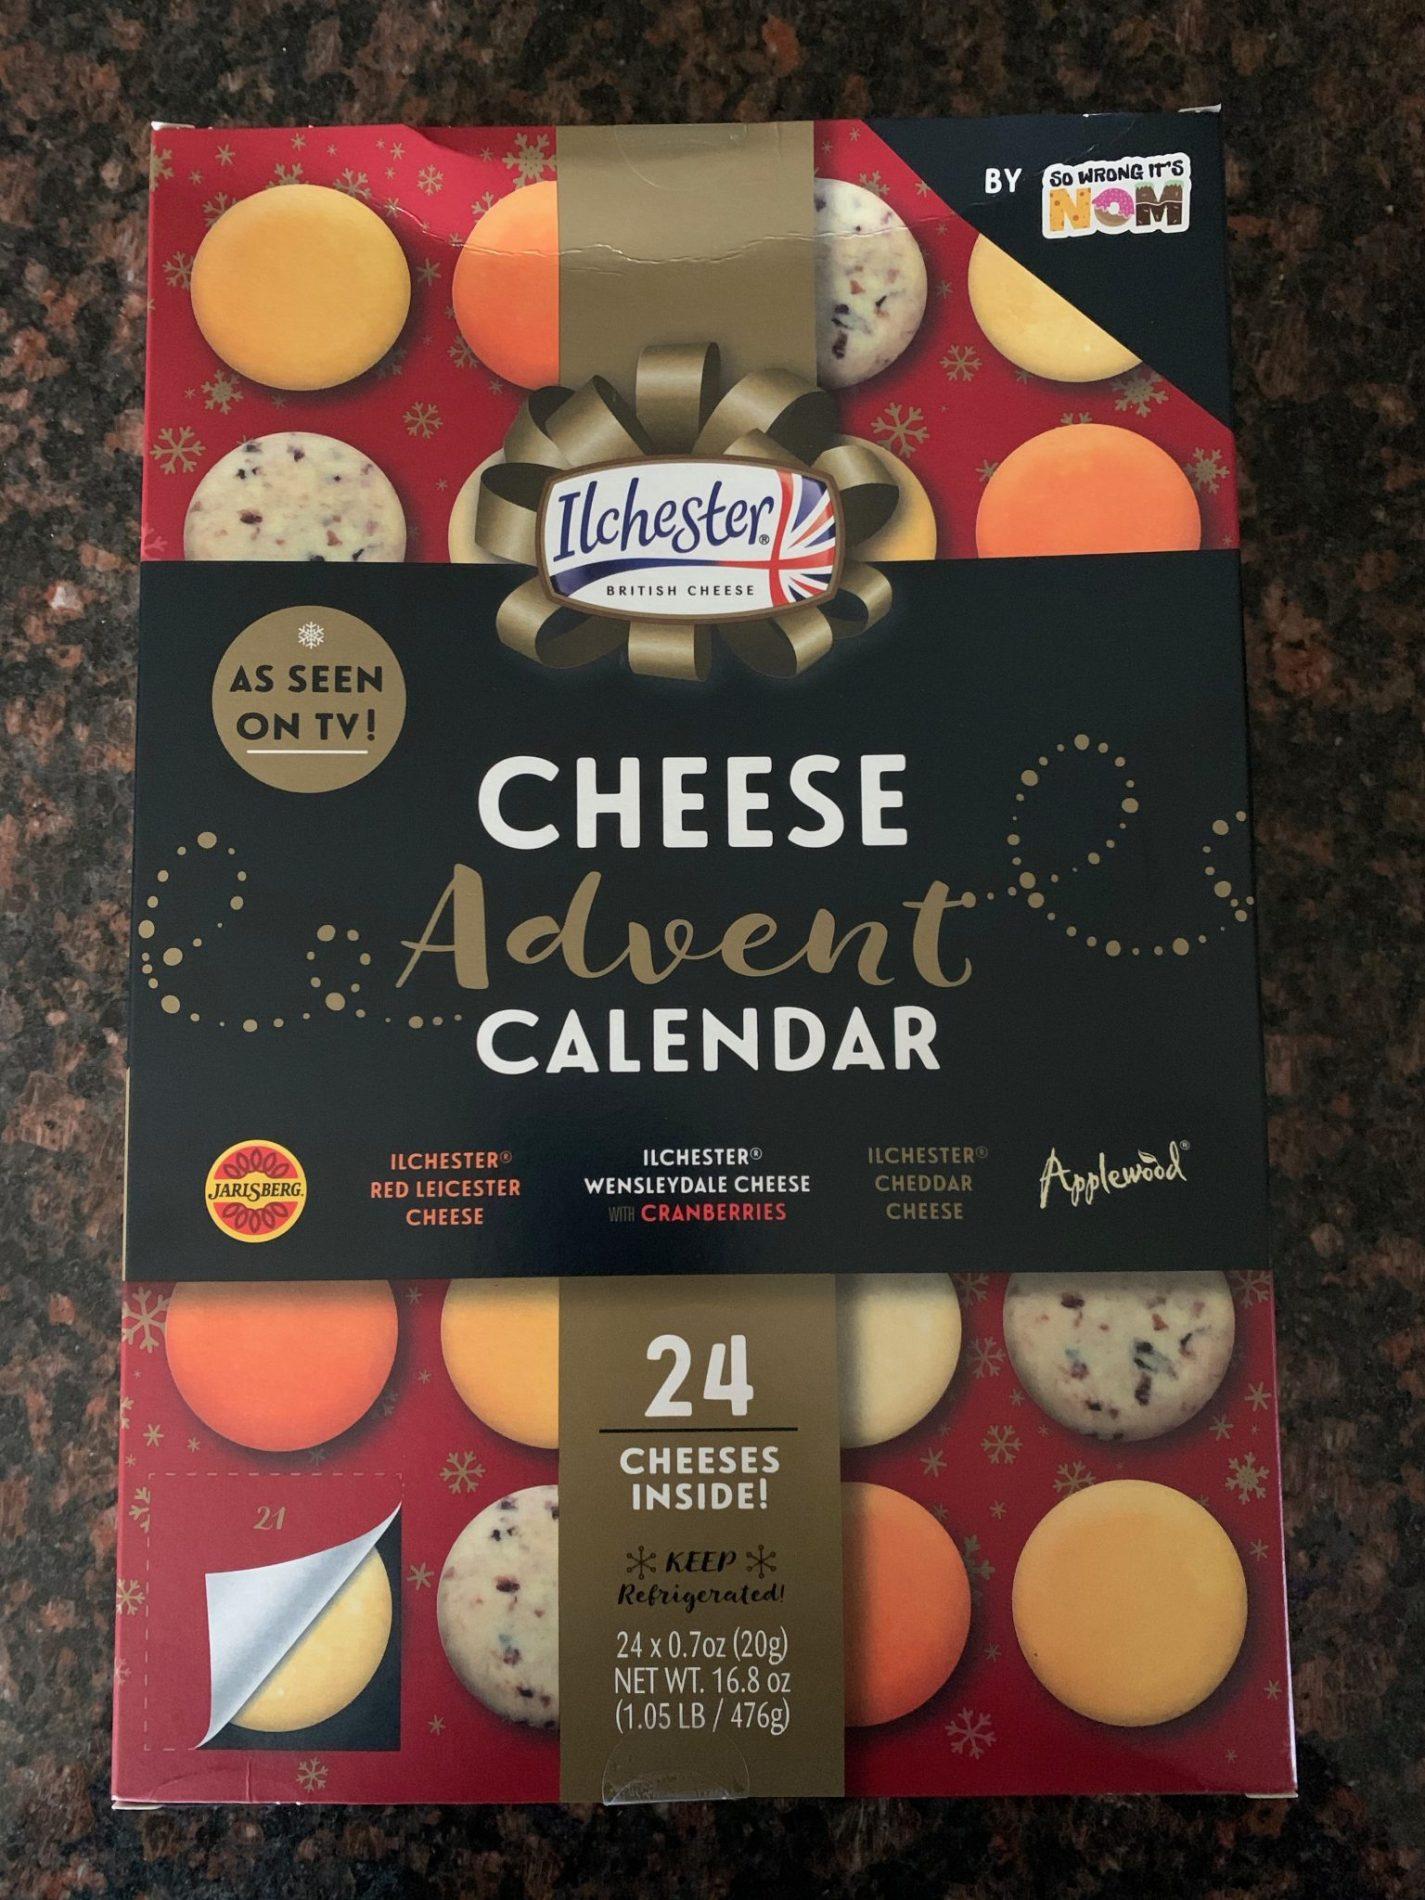 Ilchester Cheese Advent Calendar In Meijer Stores TODAY